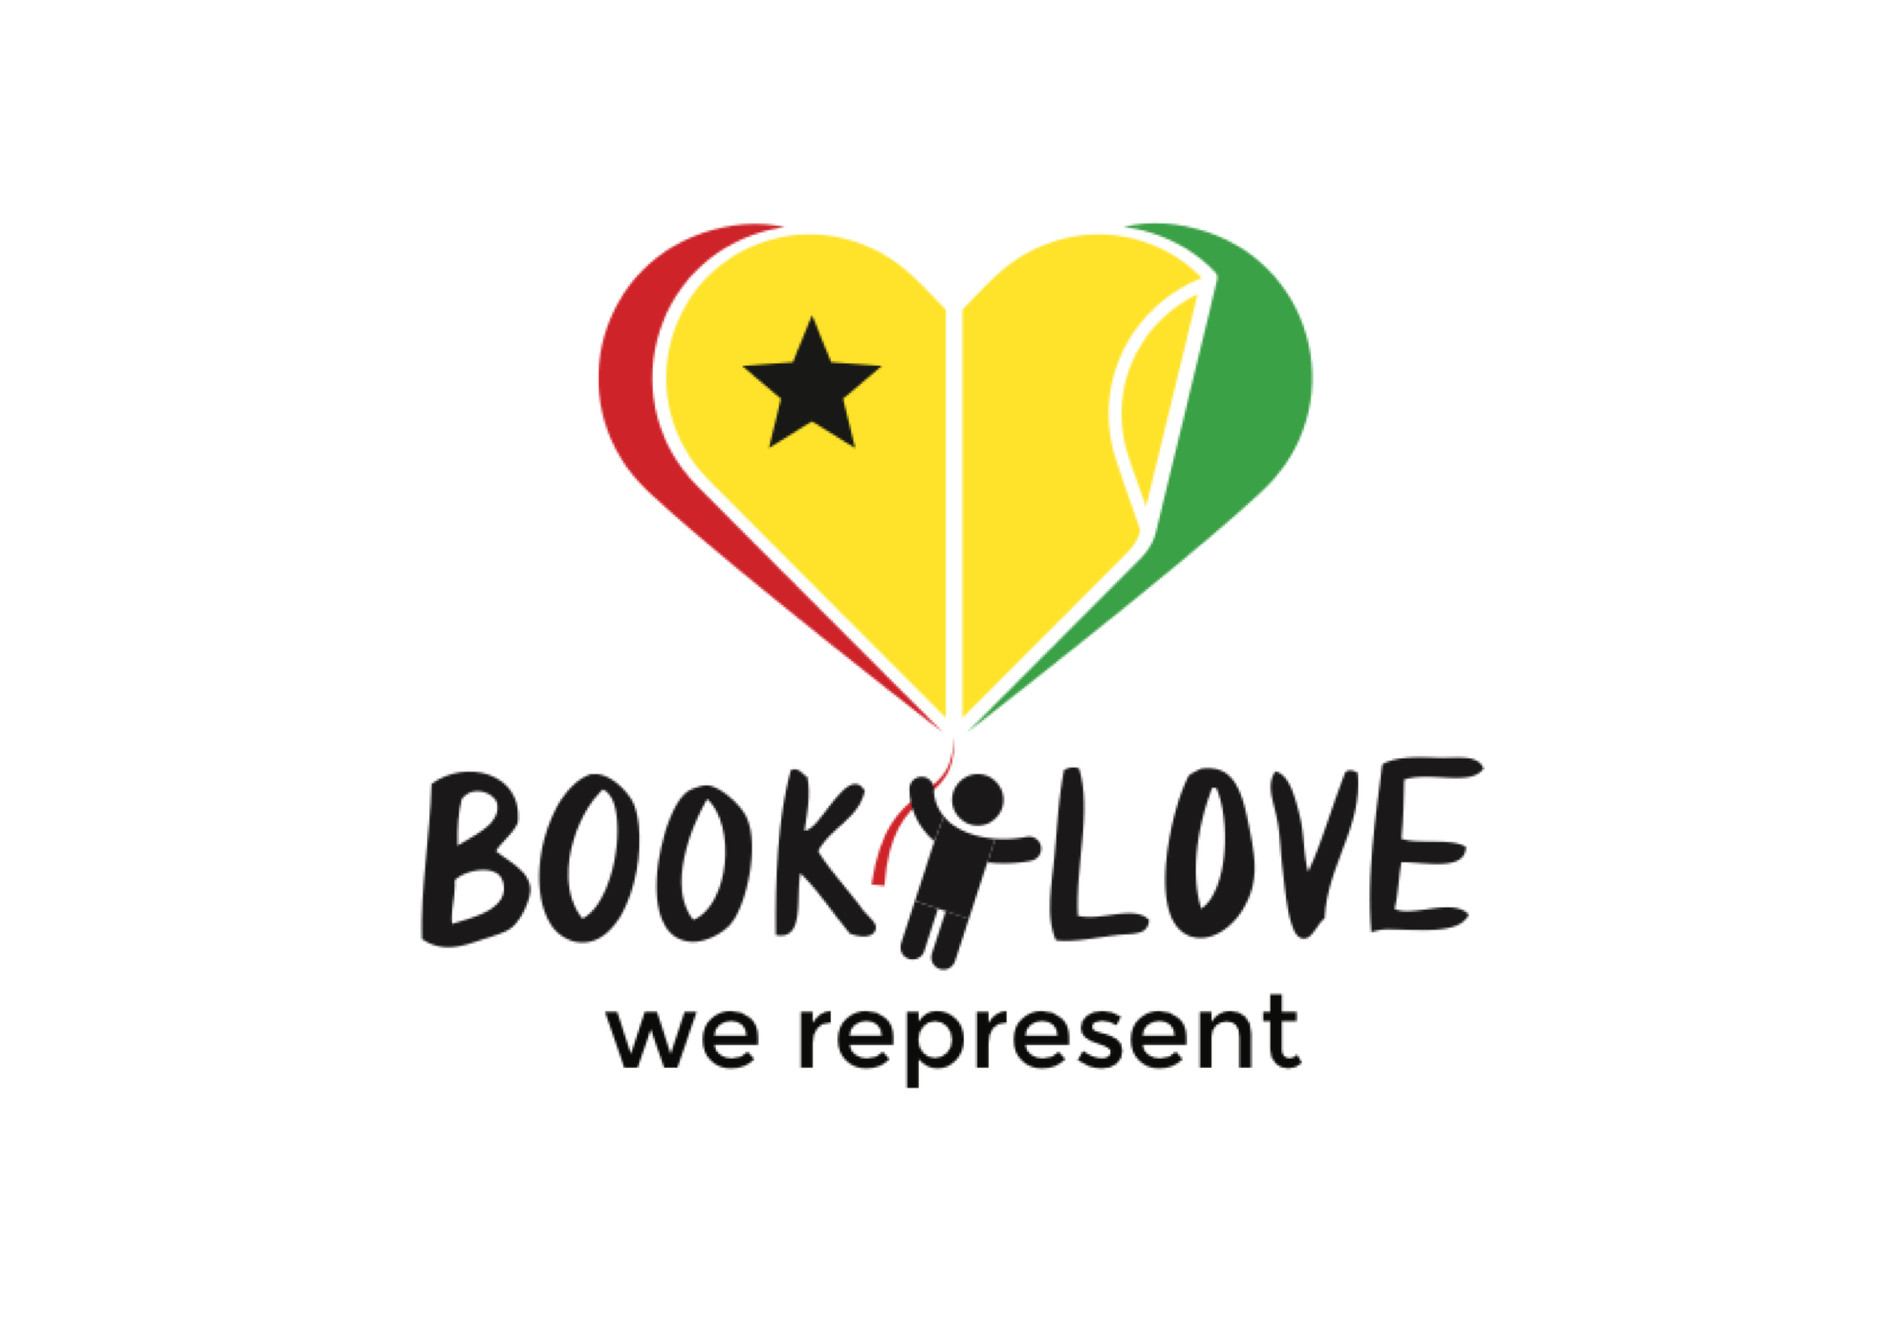 BookLove Carnival - Friday 8th October 11am-3pm